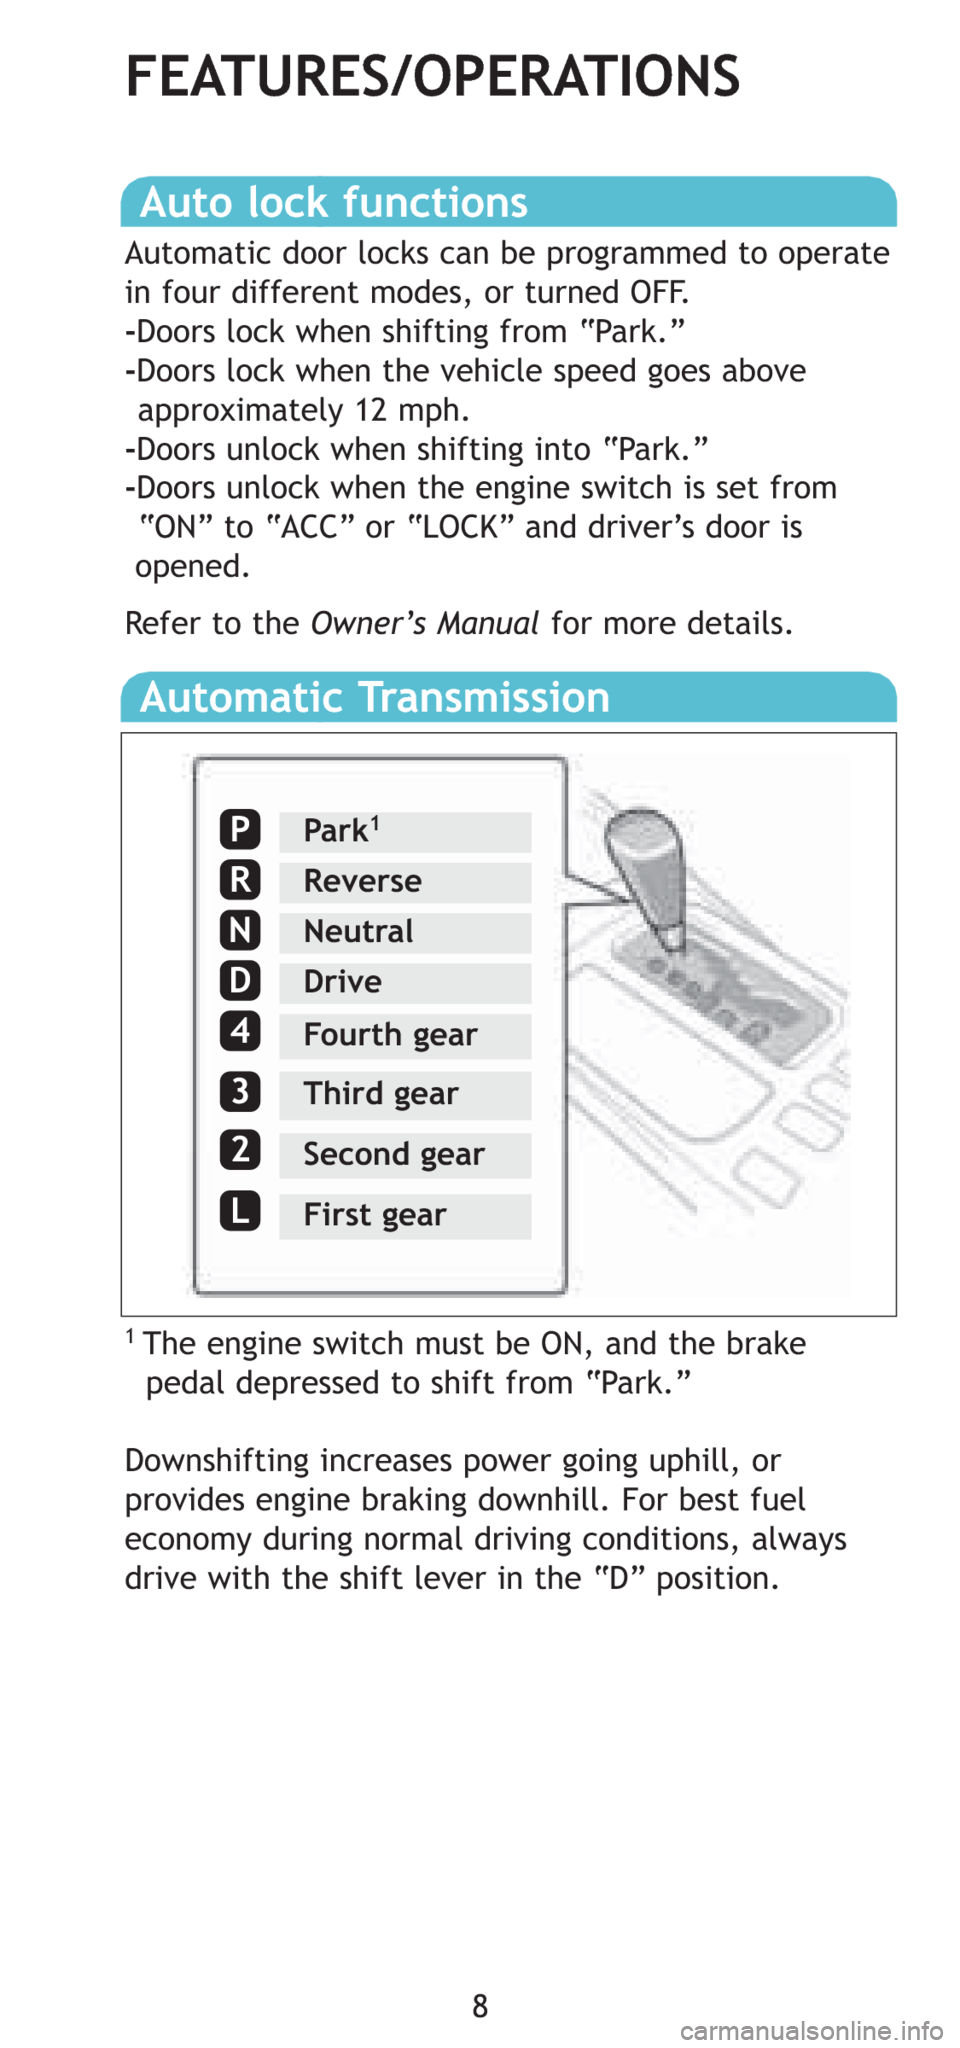 TOYOTA 4RUNNER 2008 N210 / 4.G Quick Reference Guide 8
Auto lock functions
Automatic door locks can be programmed to operate
in four different modes, or turned OFF.
-Doors lock when shifting from “Park.”
-Doors lock when the vehicle speed goes above